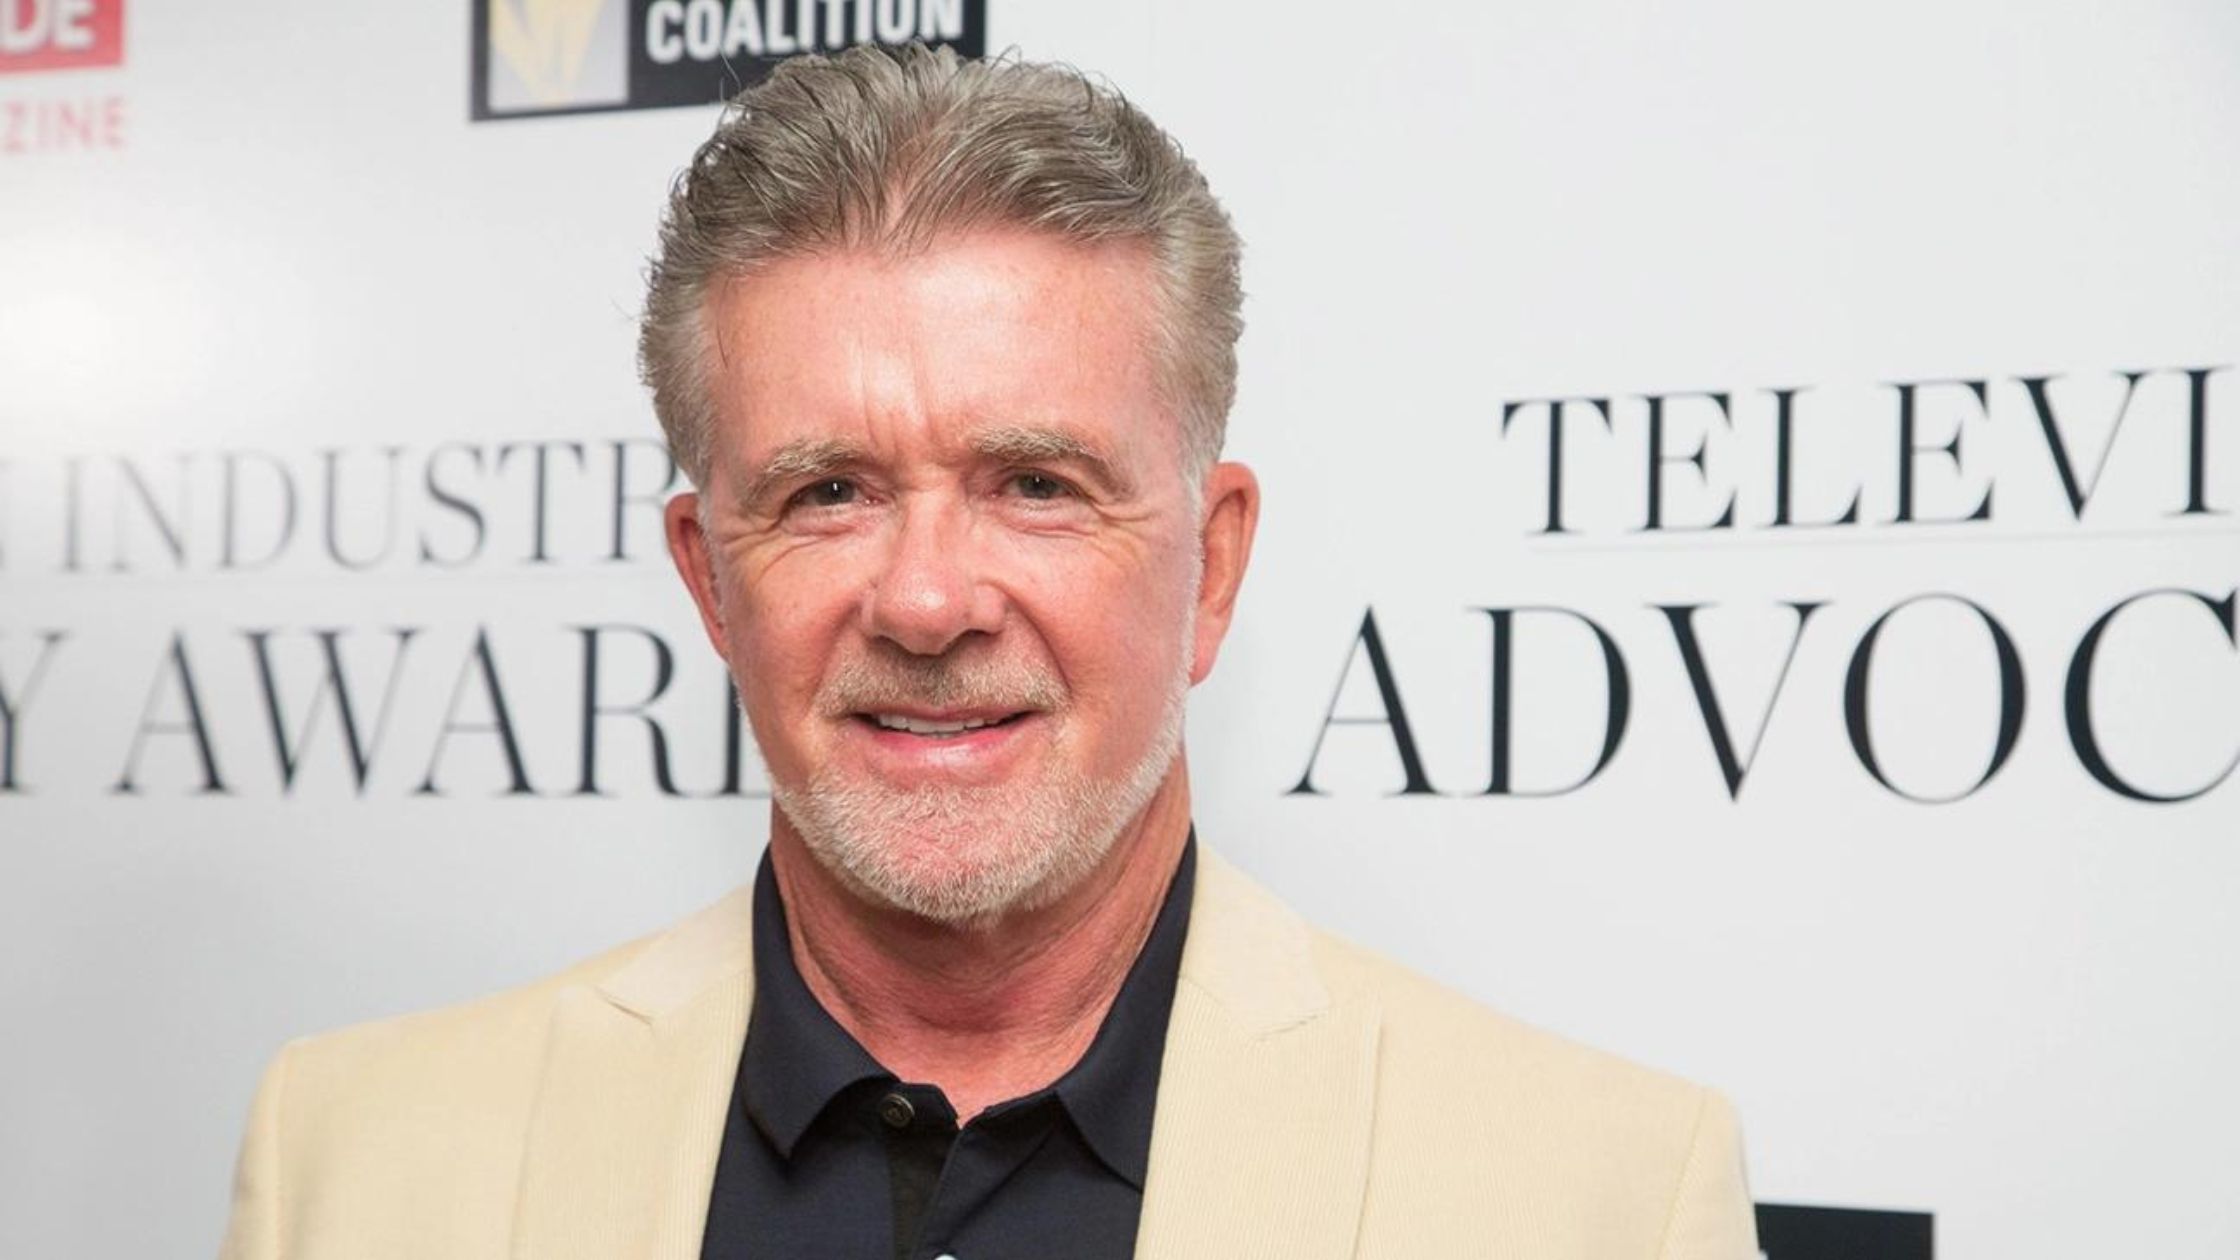 Alan Thicke's Intriguing Contribution To Juvenile Diabetes